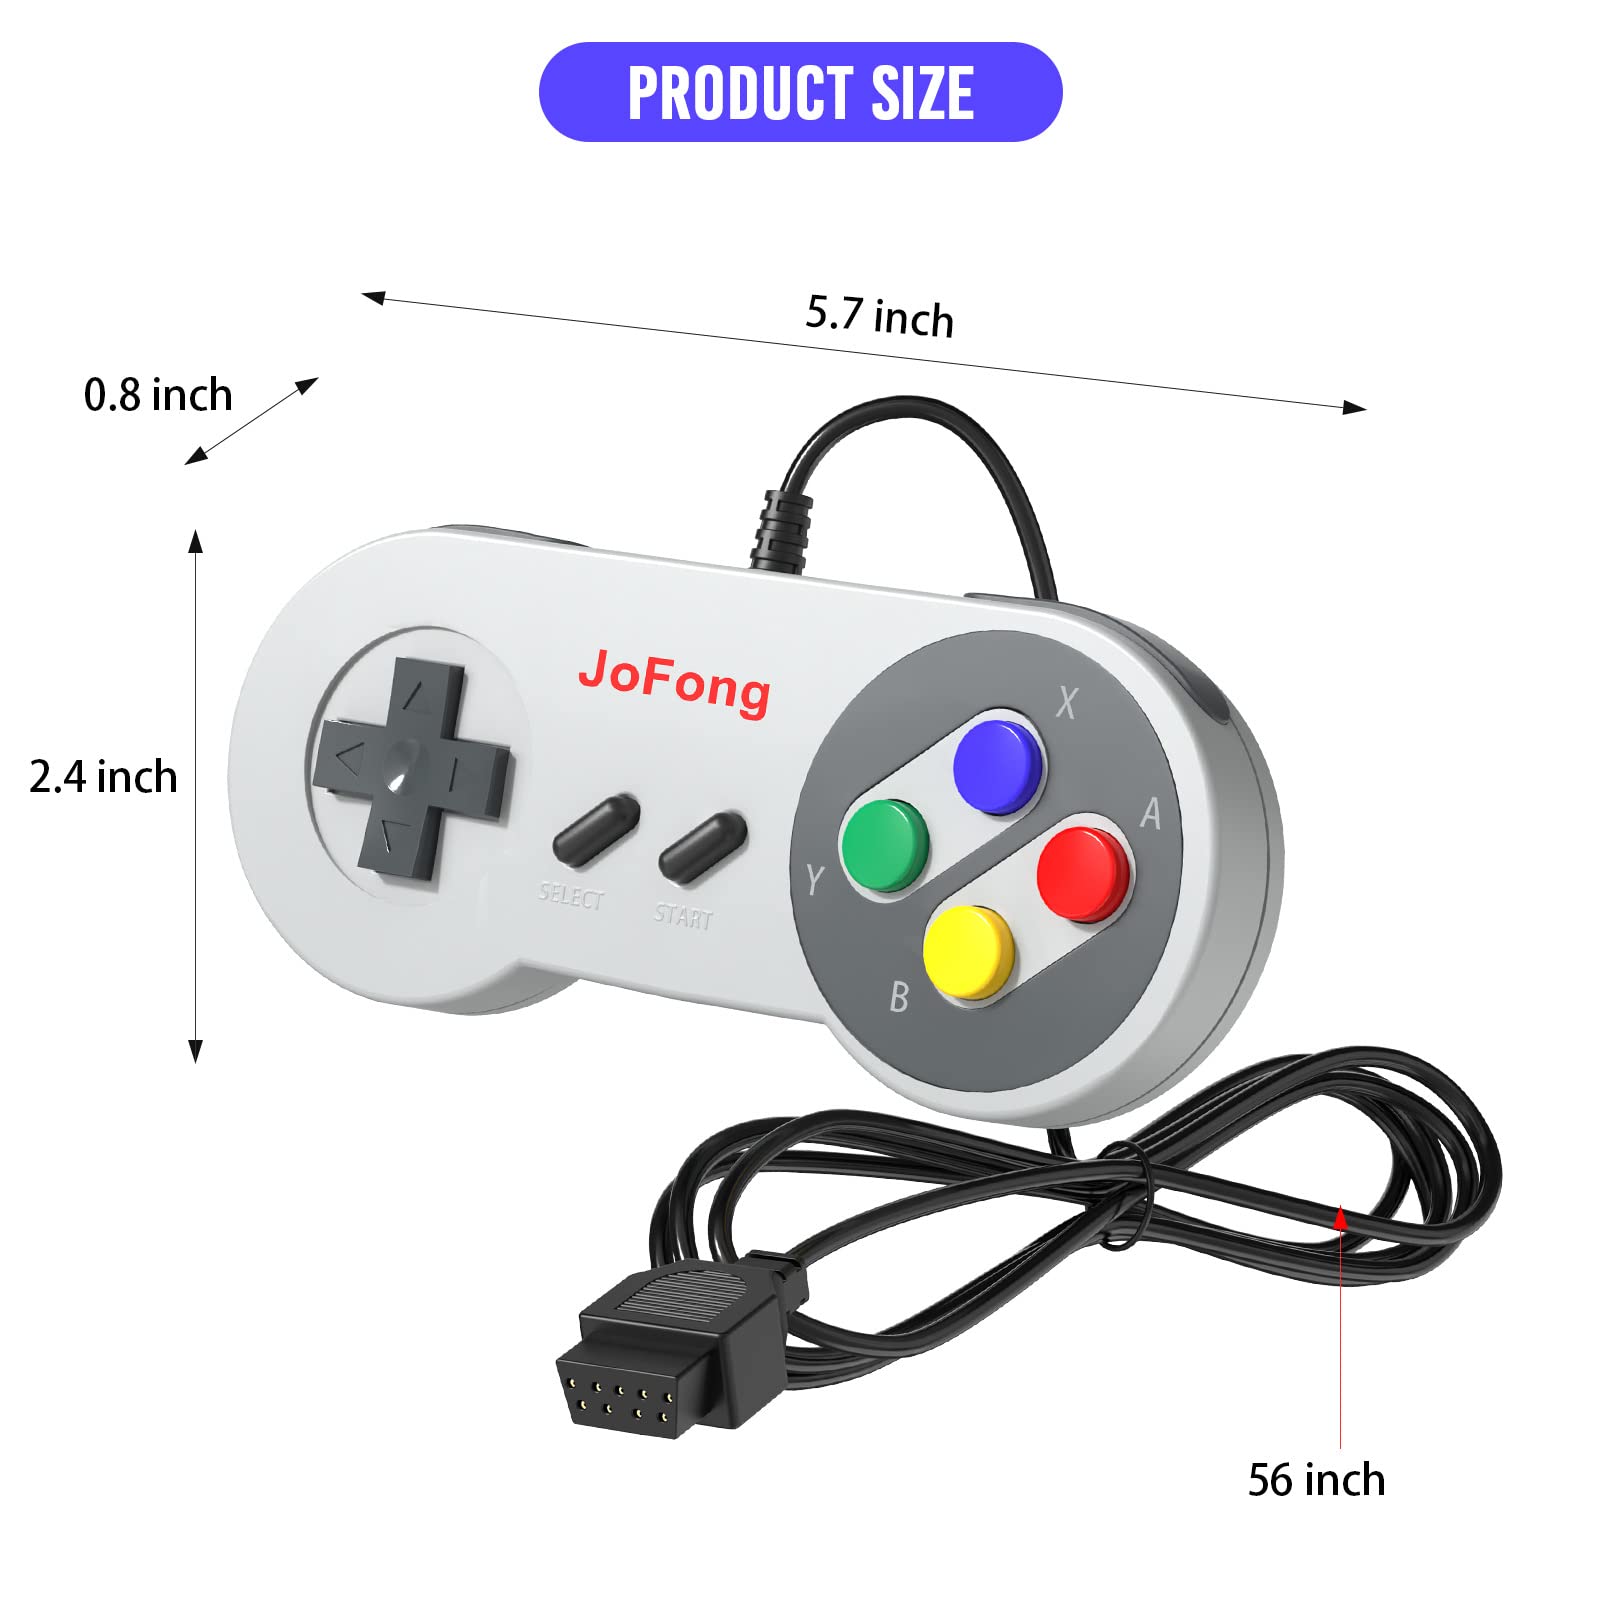 JoFong Retro Classic Controller, Suitable for AV 620, HD 621 HD 821 Classic Game Consoles Plug-and-Play Wired Video Gamepad-9 Pin Plug 2 Packs